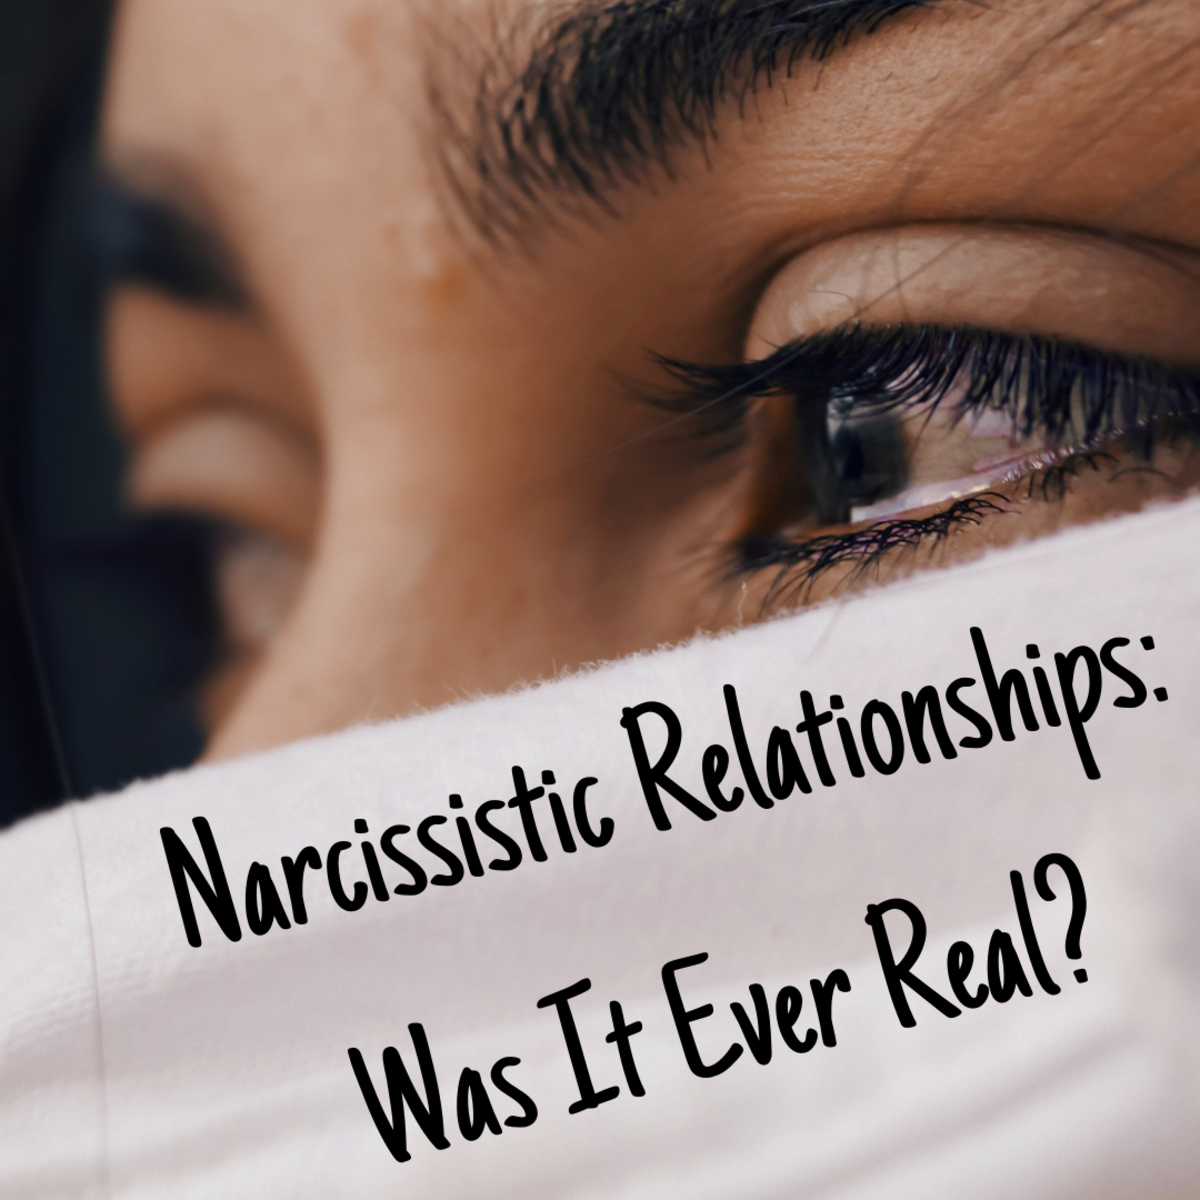 Learn about pathological narcissists and what it's like to be in a relationship with them. Read on to understand how to deal with and move on from such a toxic place.